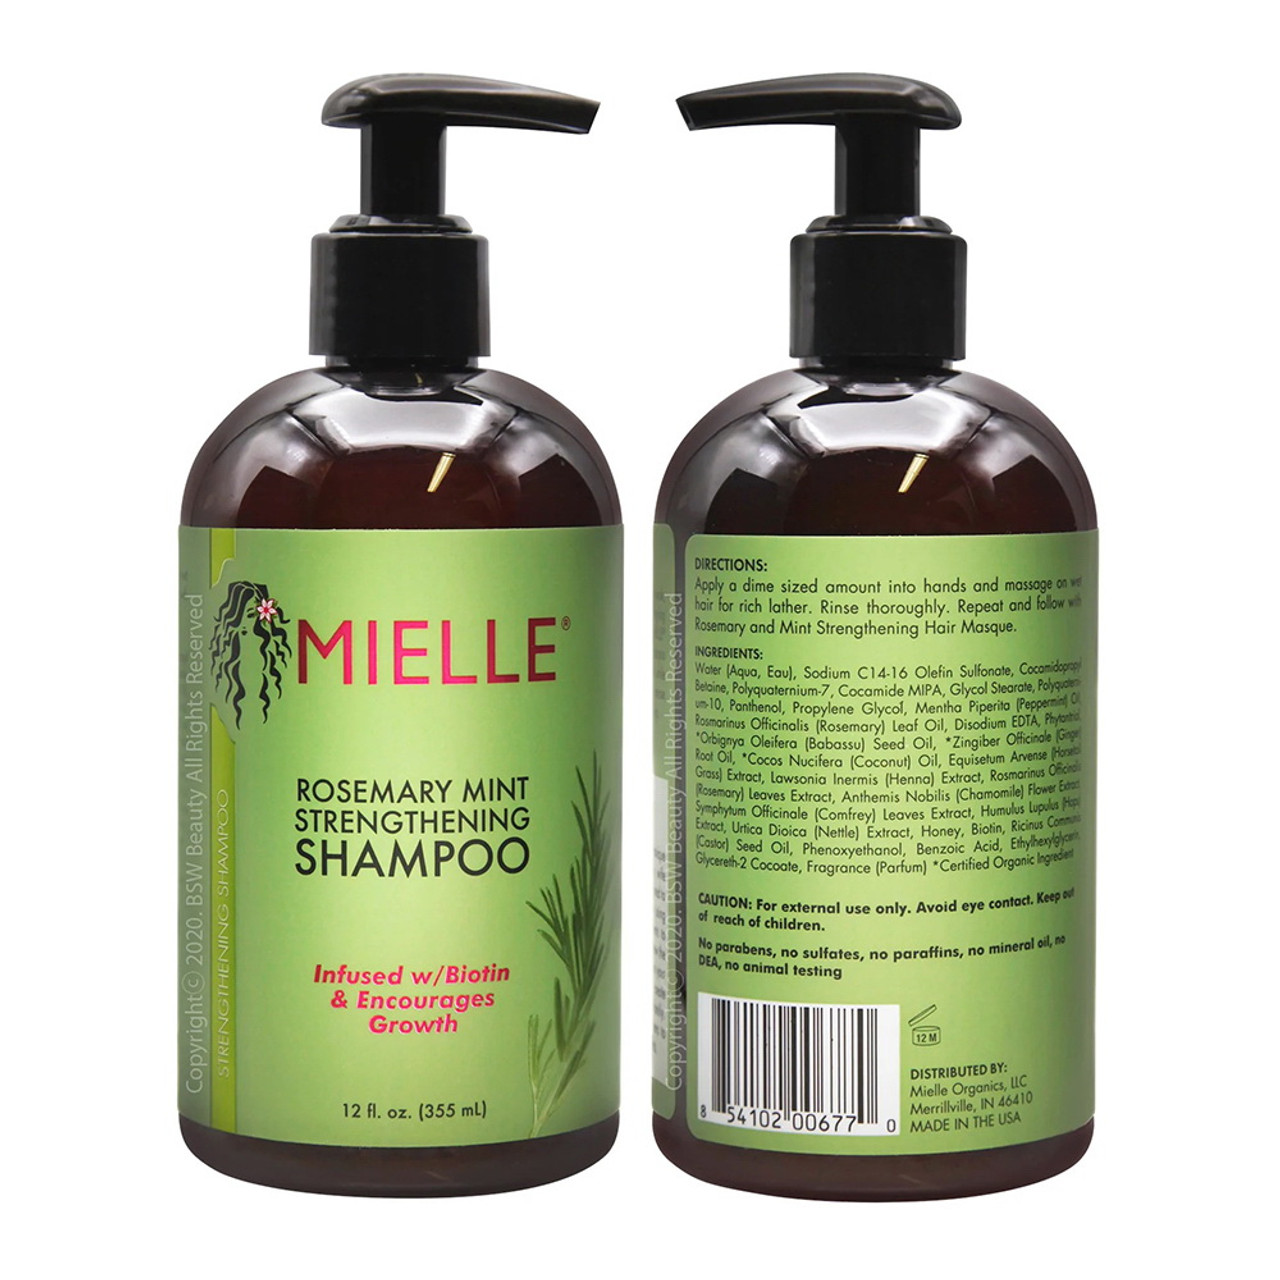 Mielle Organics Rosemary Mint Strengthening Shampoo and Conditioner Infused  with Biotin